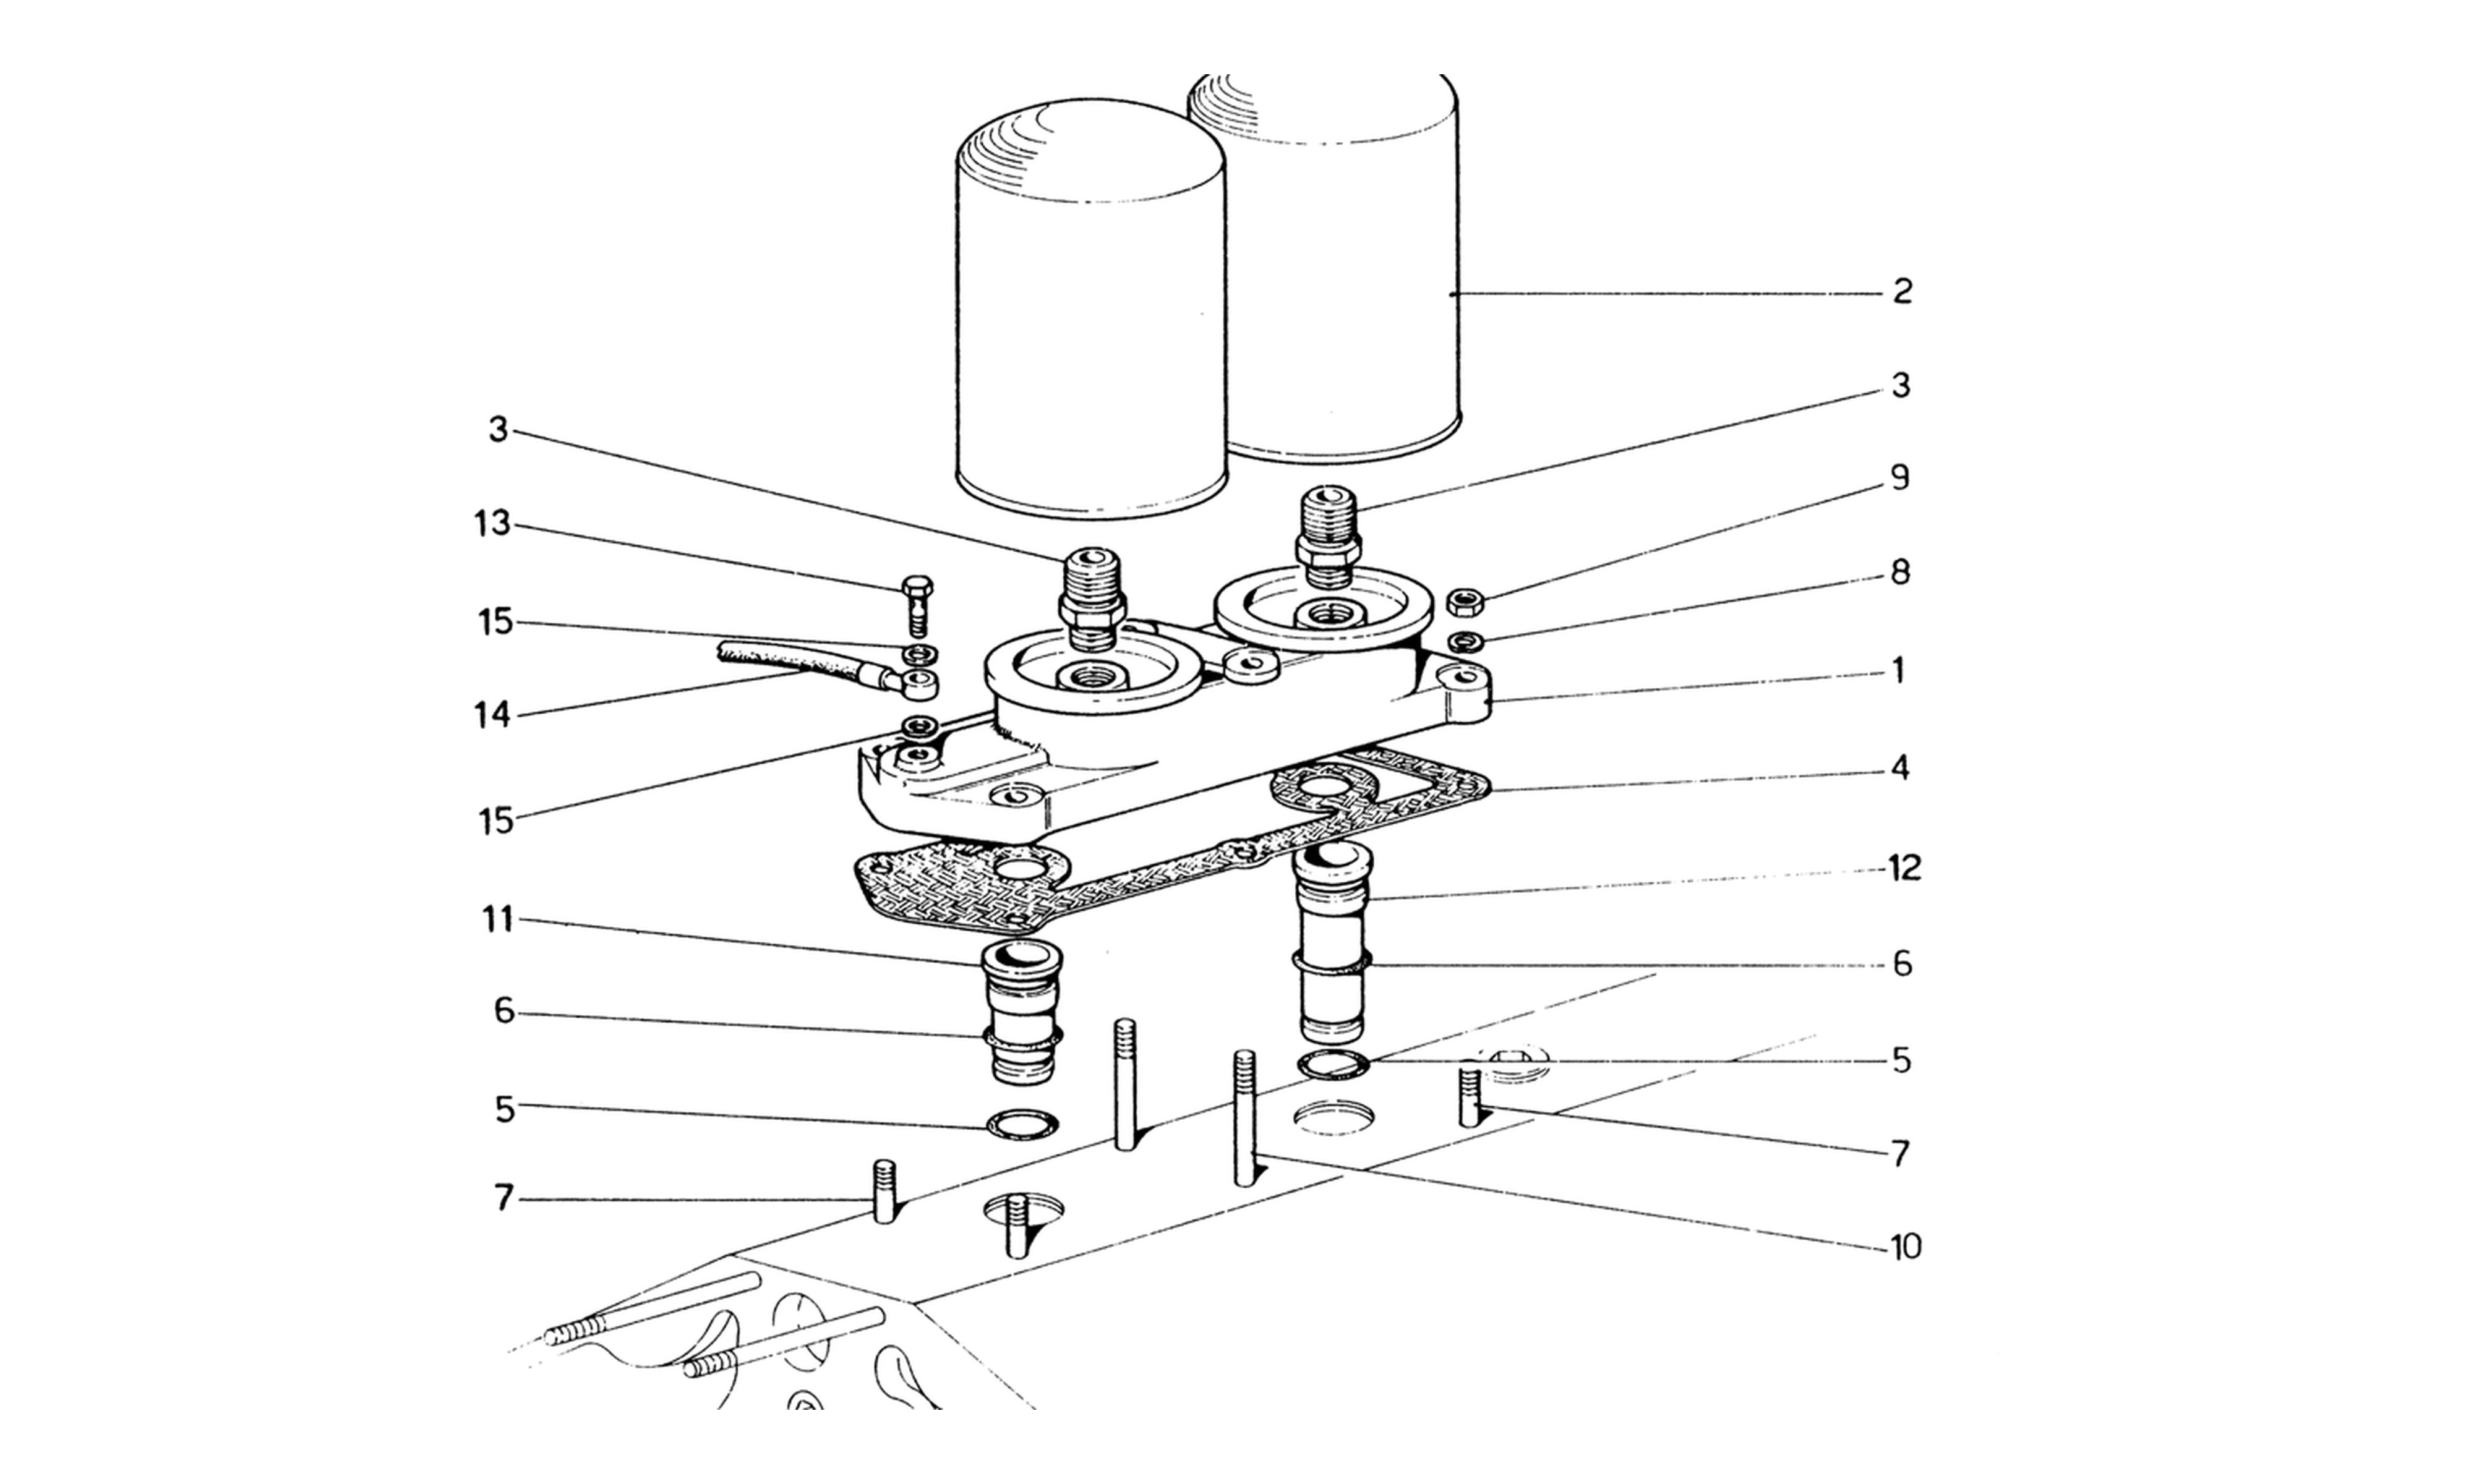 Schematic: Oil Filters